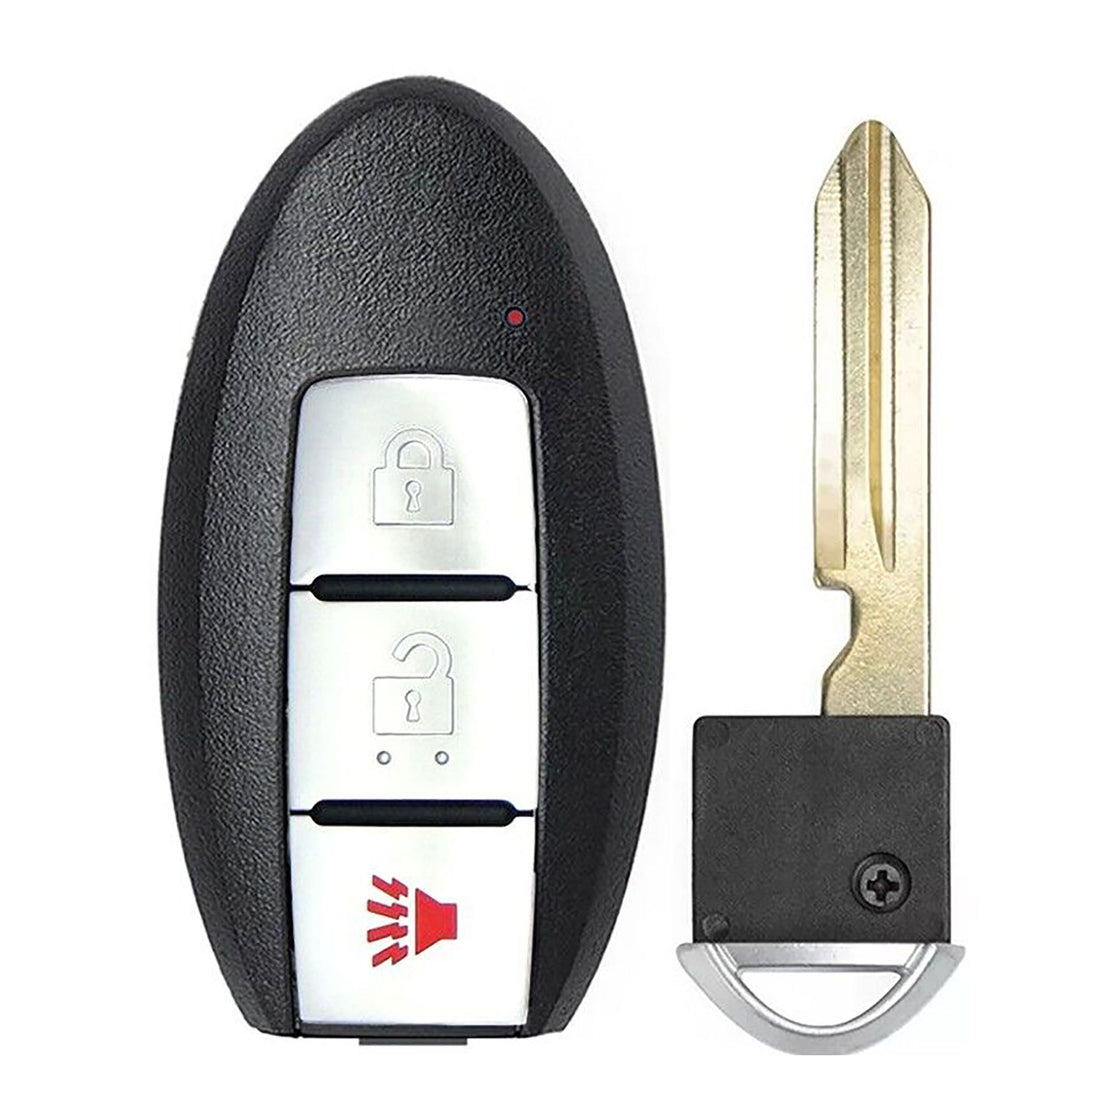 1x New Replacement Proximity Key Fob Compatible with & Fit For Nissan Vehicle. Read Description - MPN KR5TXN7-02